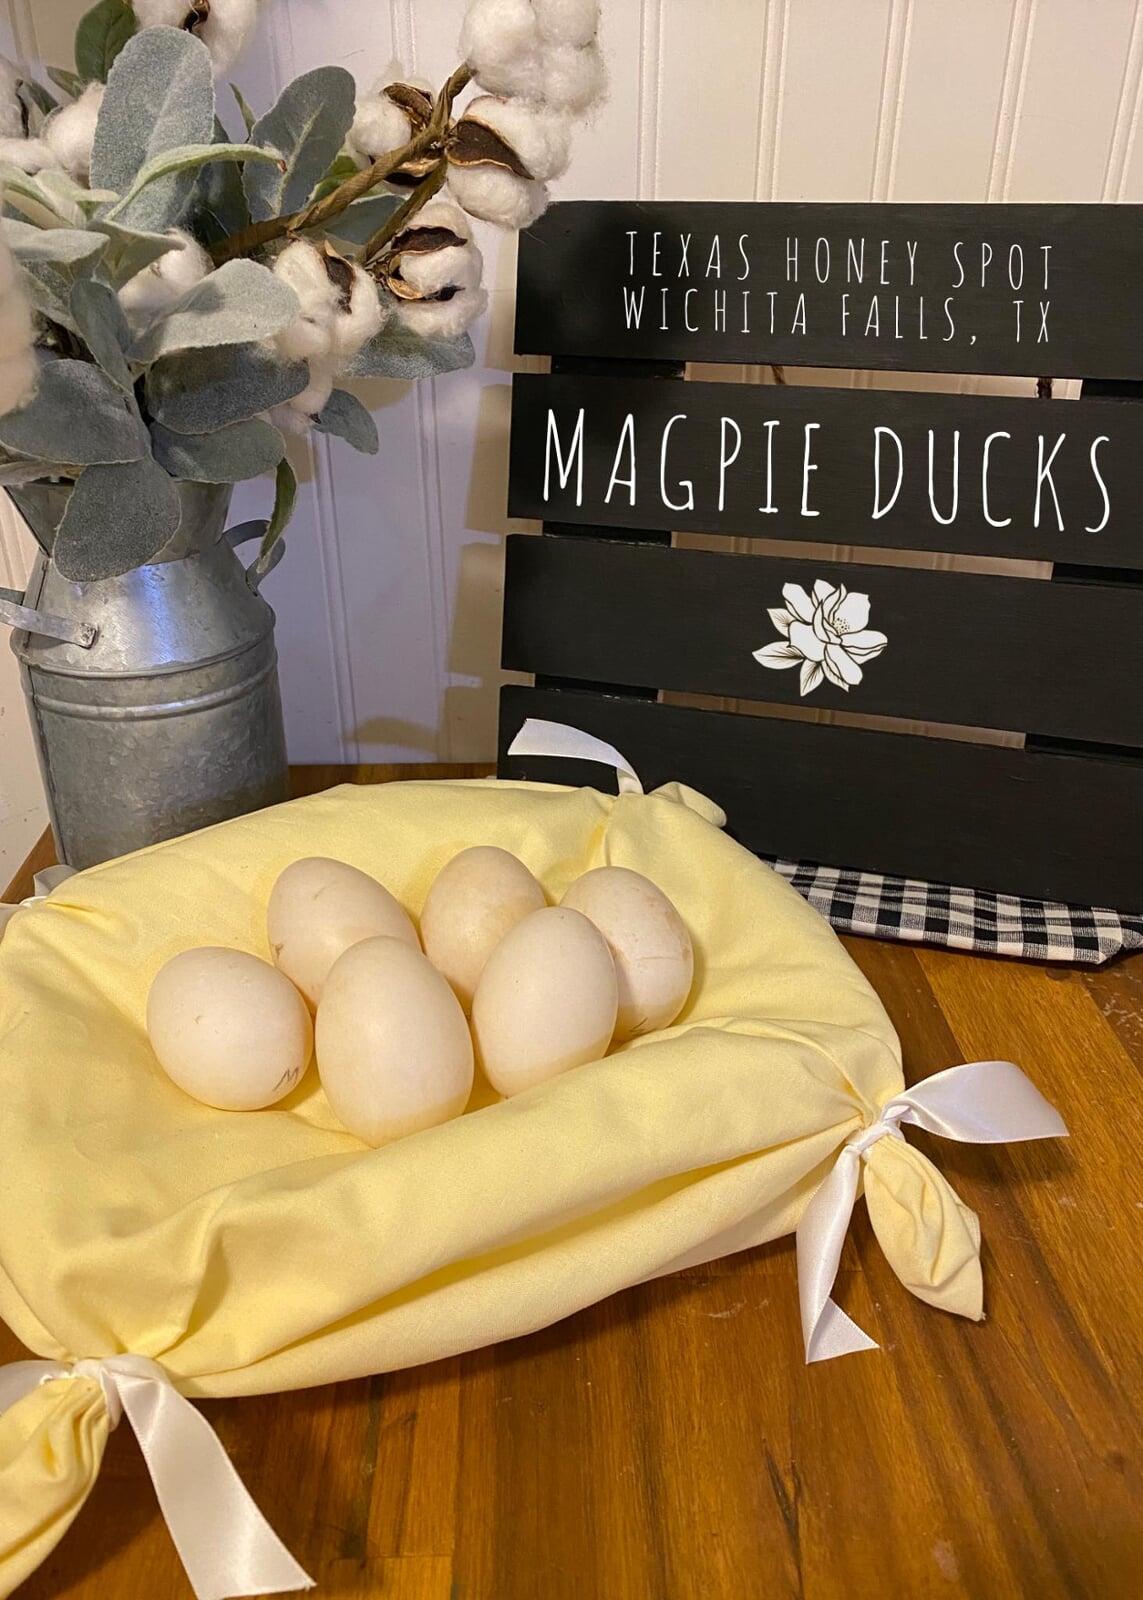 Cream/white magpie duck eggs sitting in a yellow pillow with white bows on a butcher block countertop with cotton in the background, with a black sign that says Magpie Ducks with the Texas Honey Spot logo